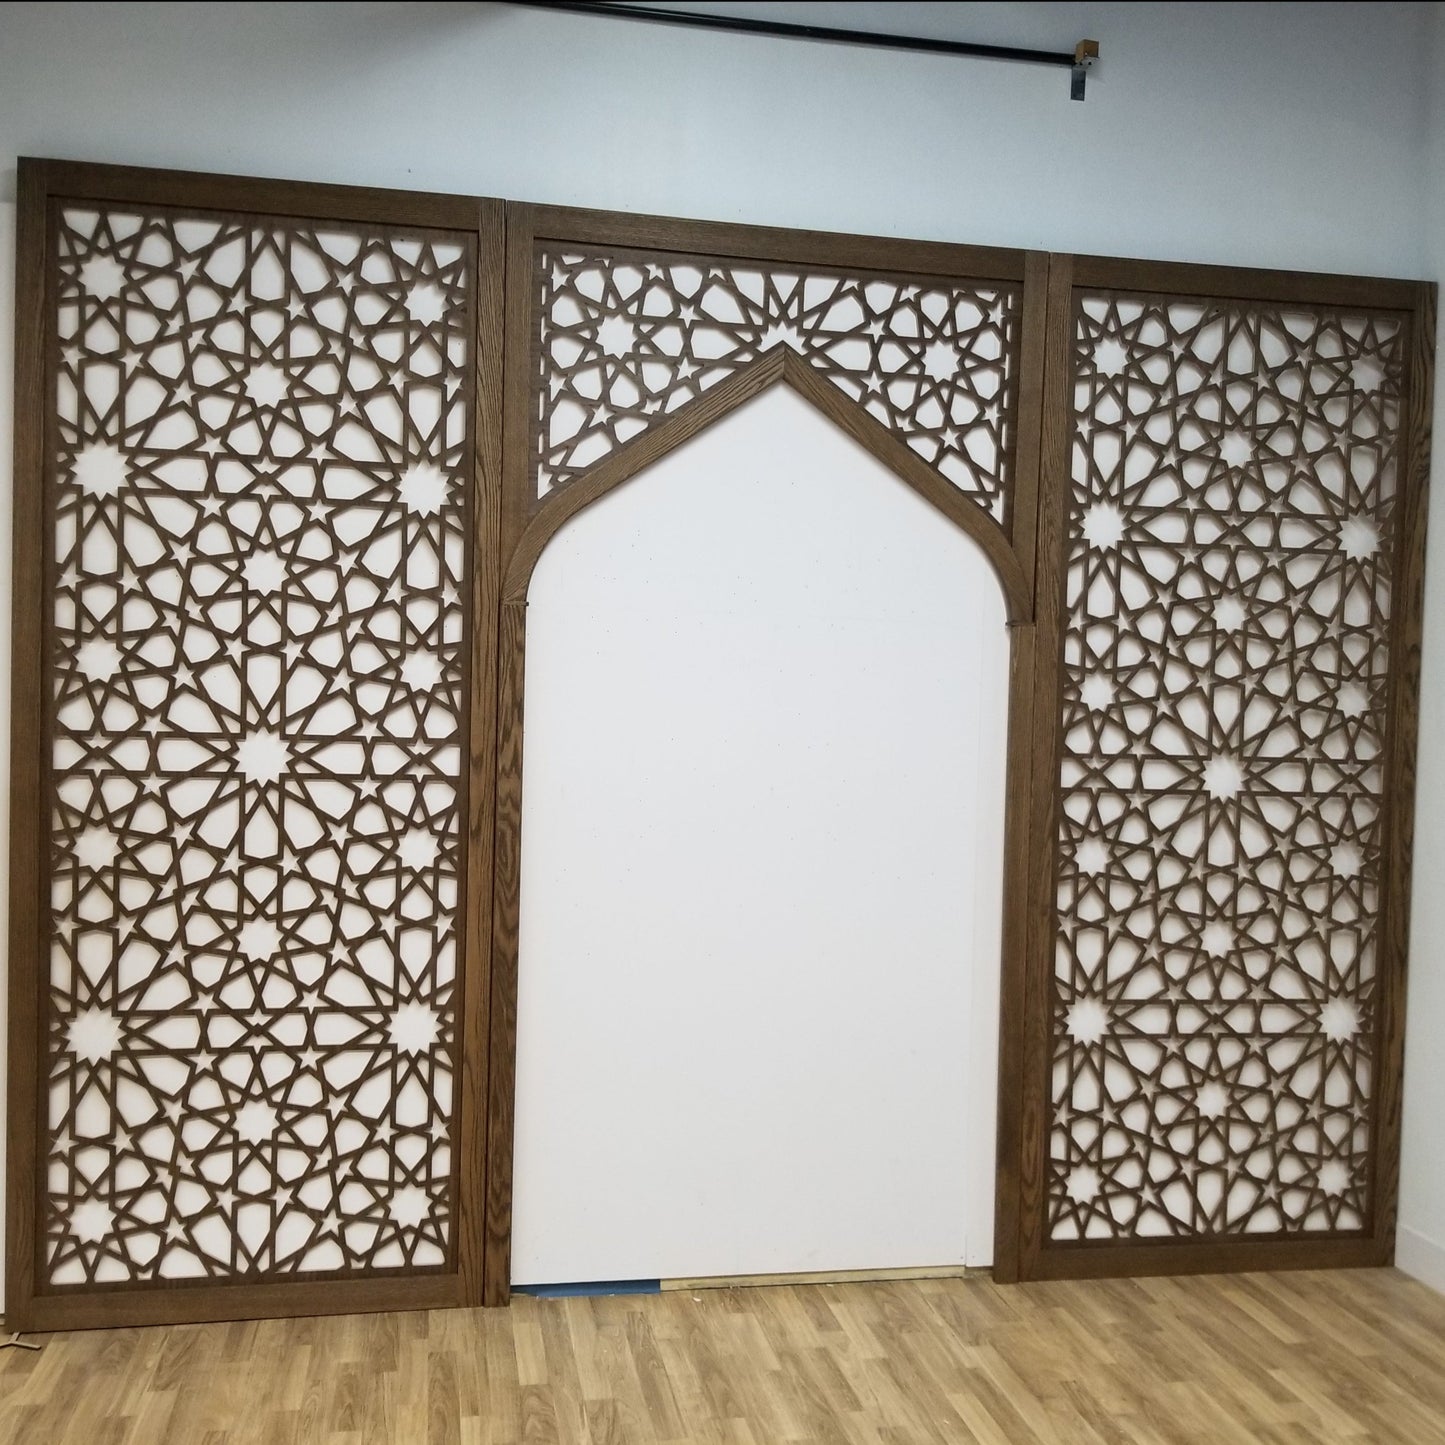 Indian custom wall dividers, Islamic panels, Mosque partition, Mosque separator, custom panel, room divider, room dividers , craftivaart, Arc panel , Islamic divider, Islamic design, Masjid divider, mosque panel, Islamic room divider, Mashrabiya, DIY, Moroccan Designs , arc panel,